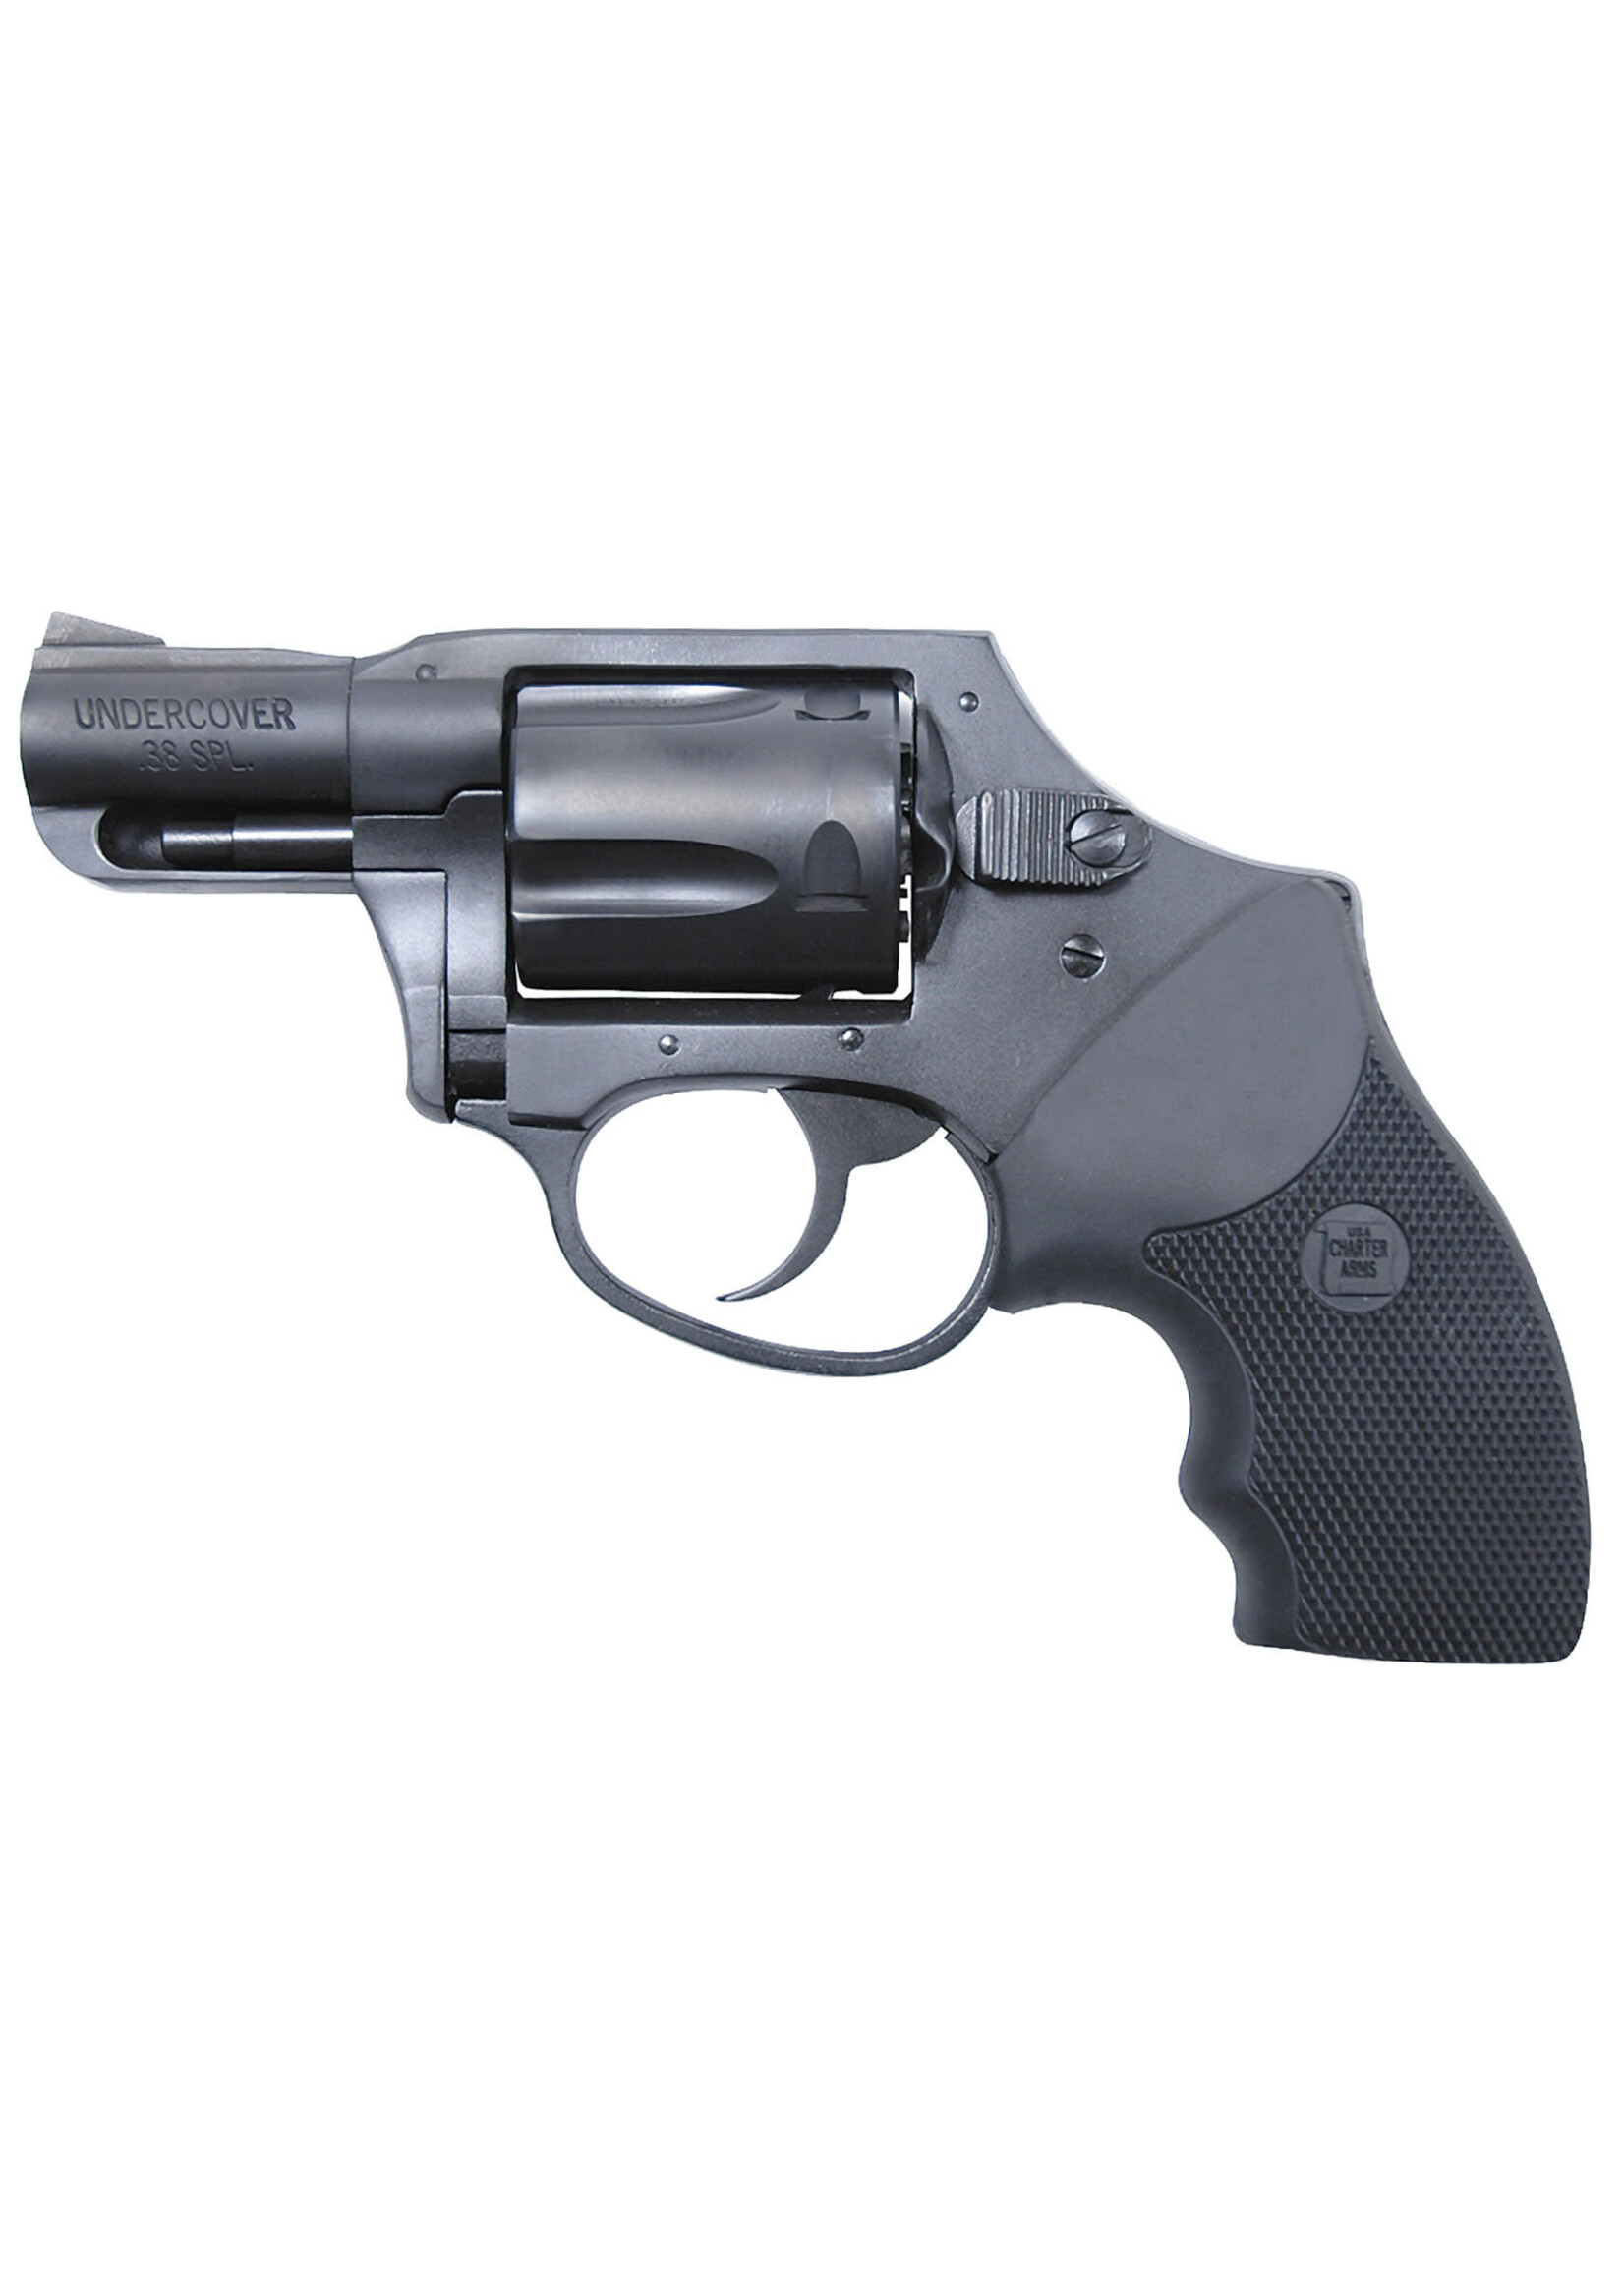 Charter Arms SPECIAL ORDER Charter Arms 13811 Undercover 38 Special 5rd 2" Stainless Steel Barrel/Cylinder w/Black Finish, Aluminum Frame w/Black Finish, DAO Concealed Hammer, Finger Grooved Black Rubber Grip